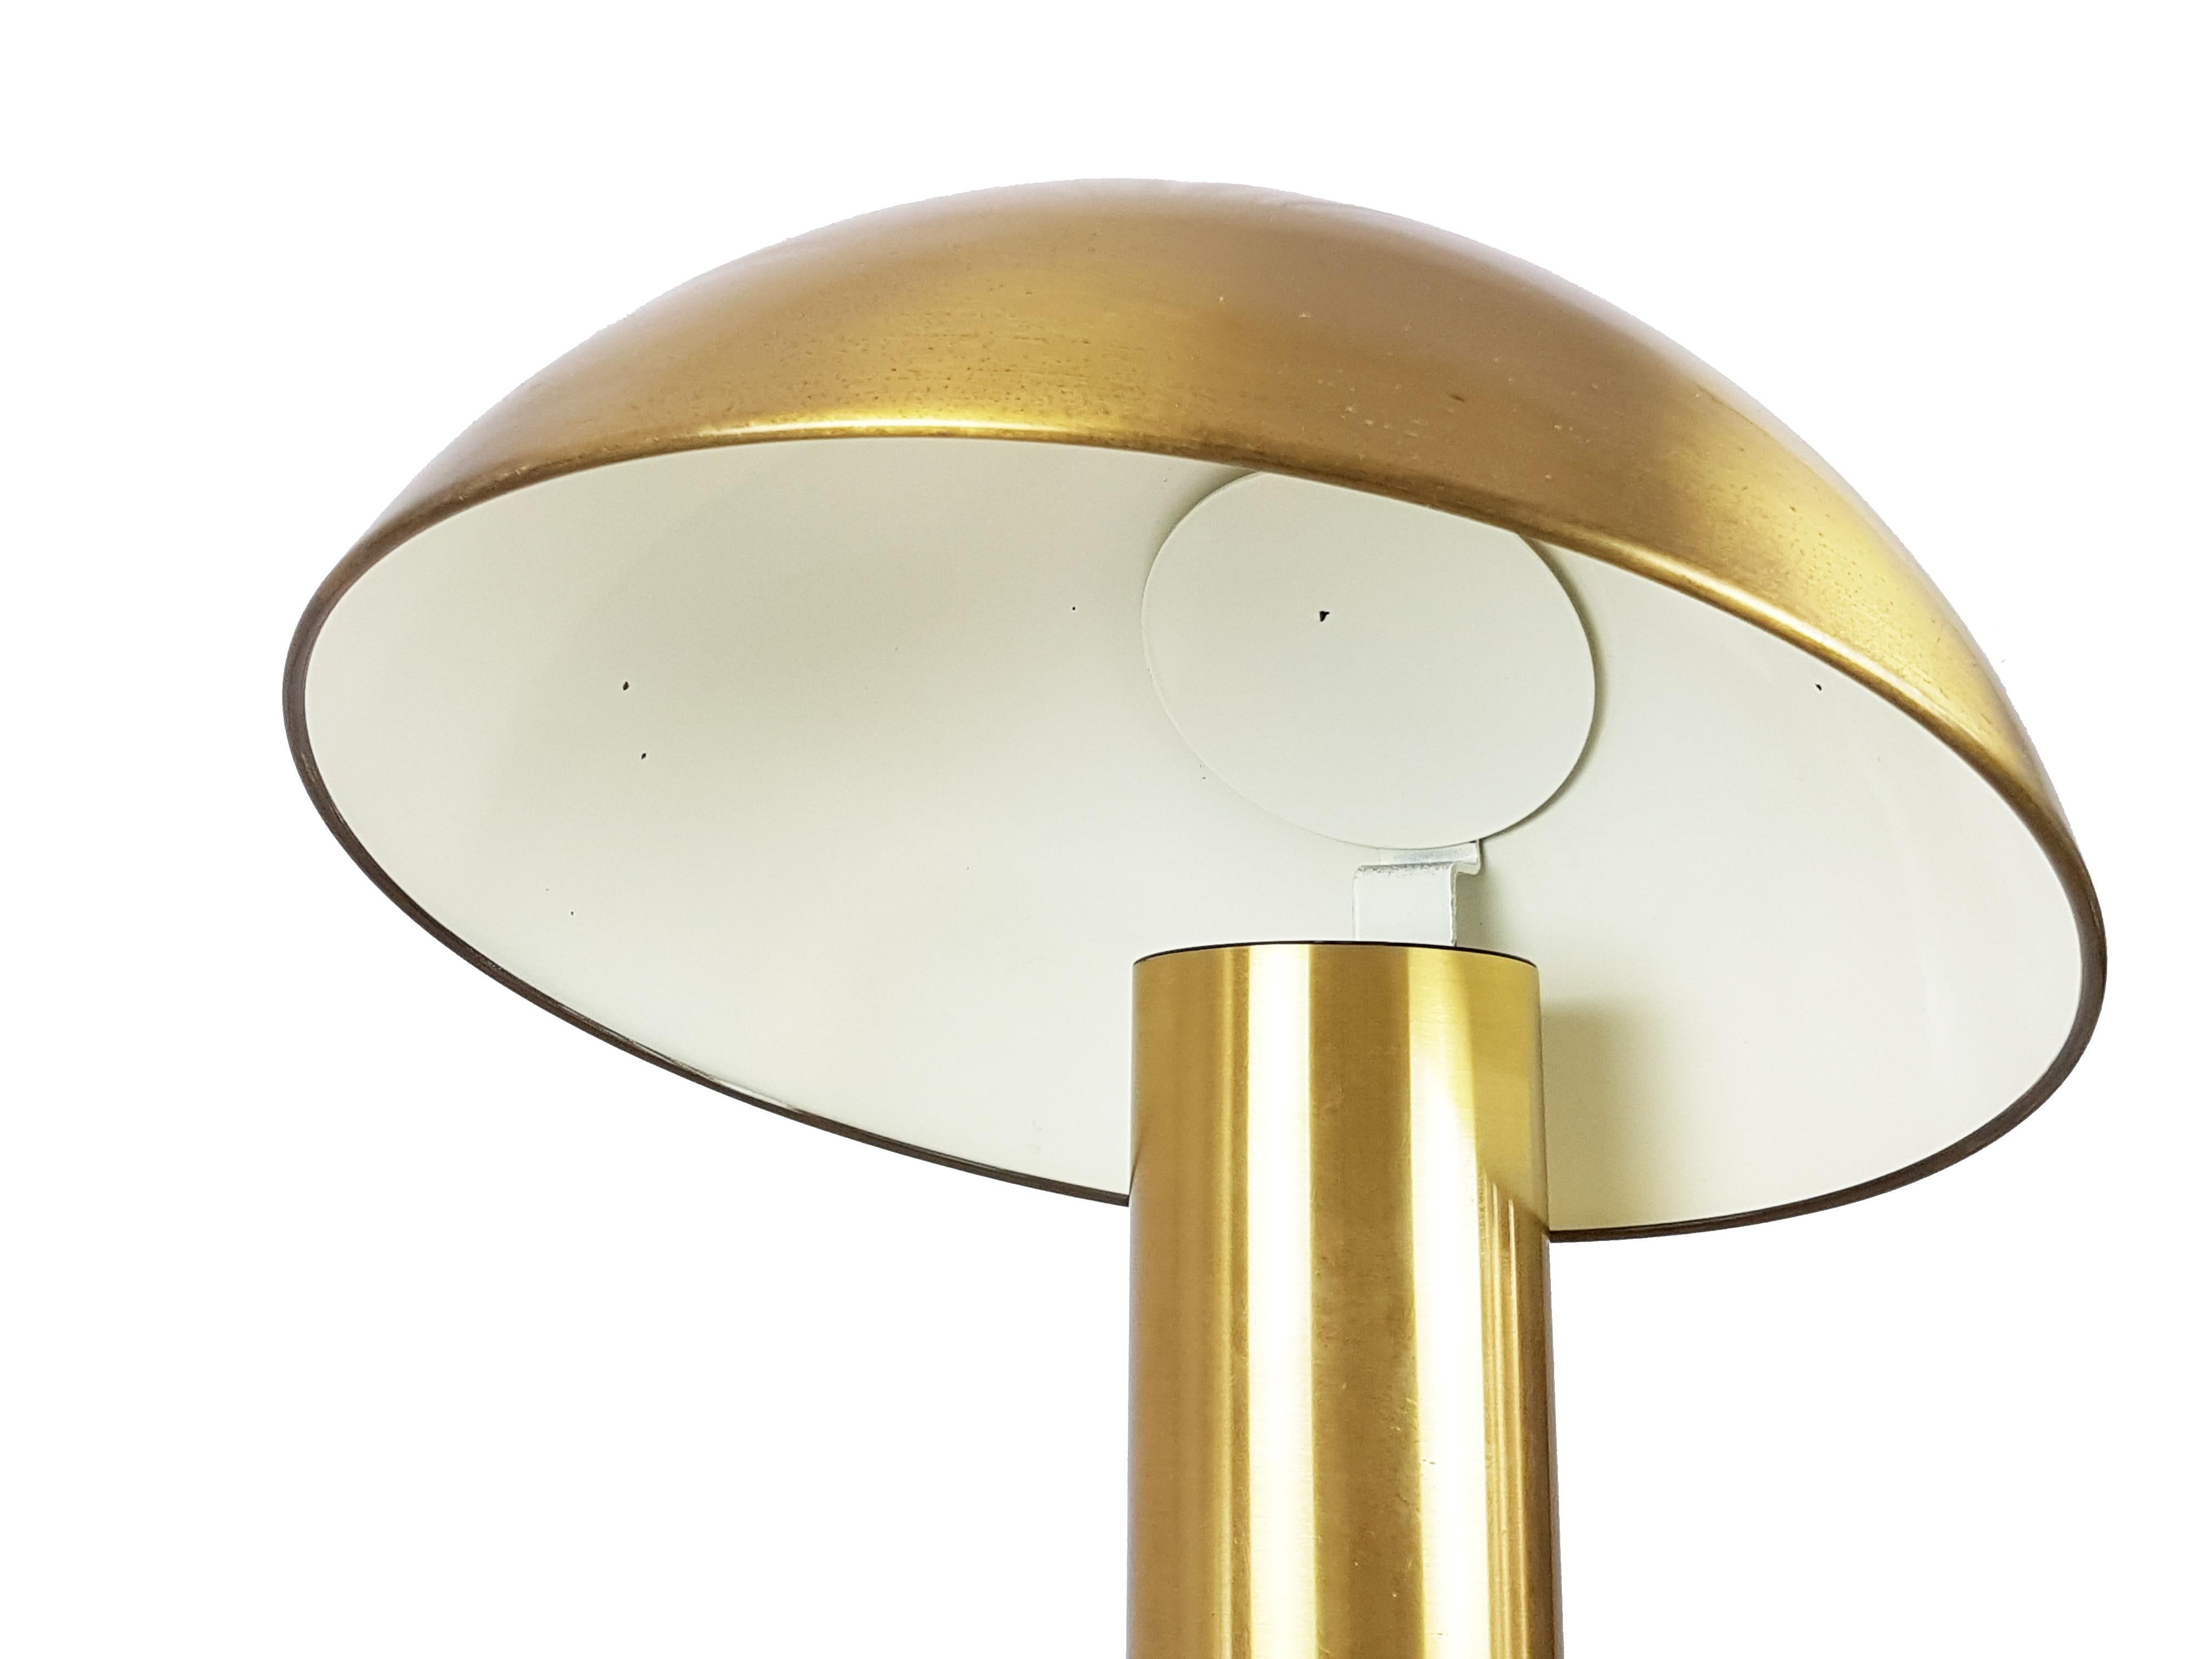 This table lamp was designed by Franco Mirenzi for Valenti in 1978. It is made from mat brass and metal and it features a dimmable electrical system. Fair vintage condition: Signs of wear and oxidation patina consistent with age and use. See